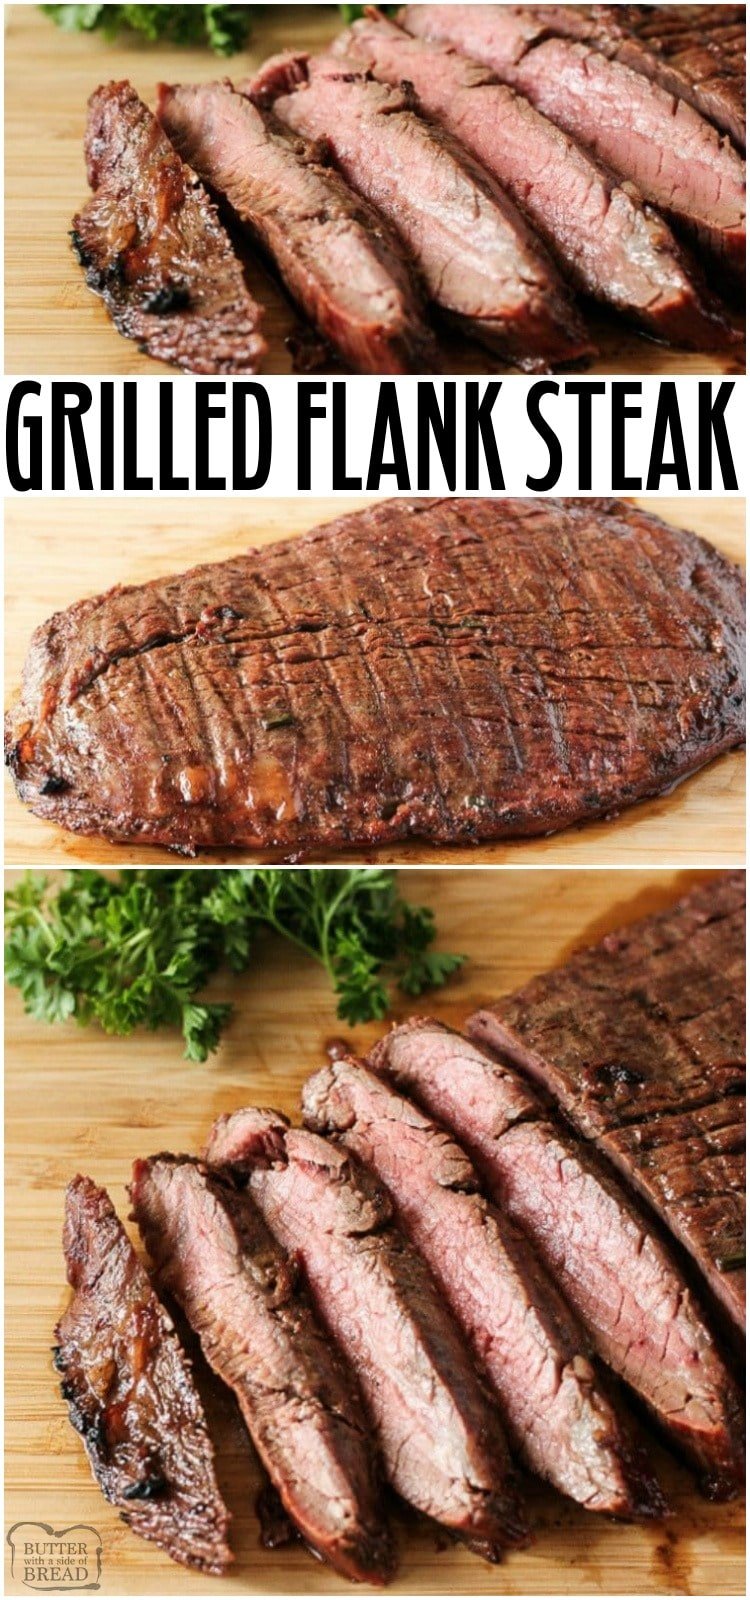 Grilled Flank Steak is so simple to make with a simple and flavorful flank steak marinade made up of soy sauce, red wine vinegar, honey, garlic, ginger and green onions. This steak recipe cooks up quick and can easily feed a crowd. #flanksteak #steakrecipes #howtocooksteak #flanksteakmarinade #flanksteakrecipes #recipefrom Butter With a Side of Bread